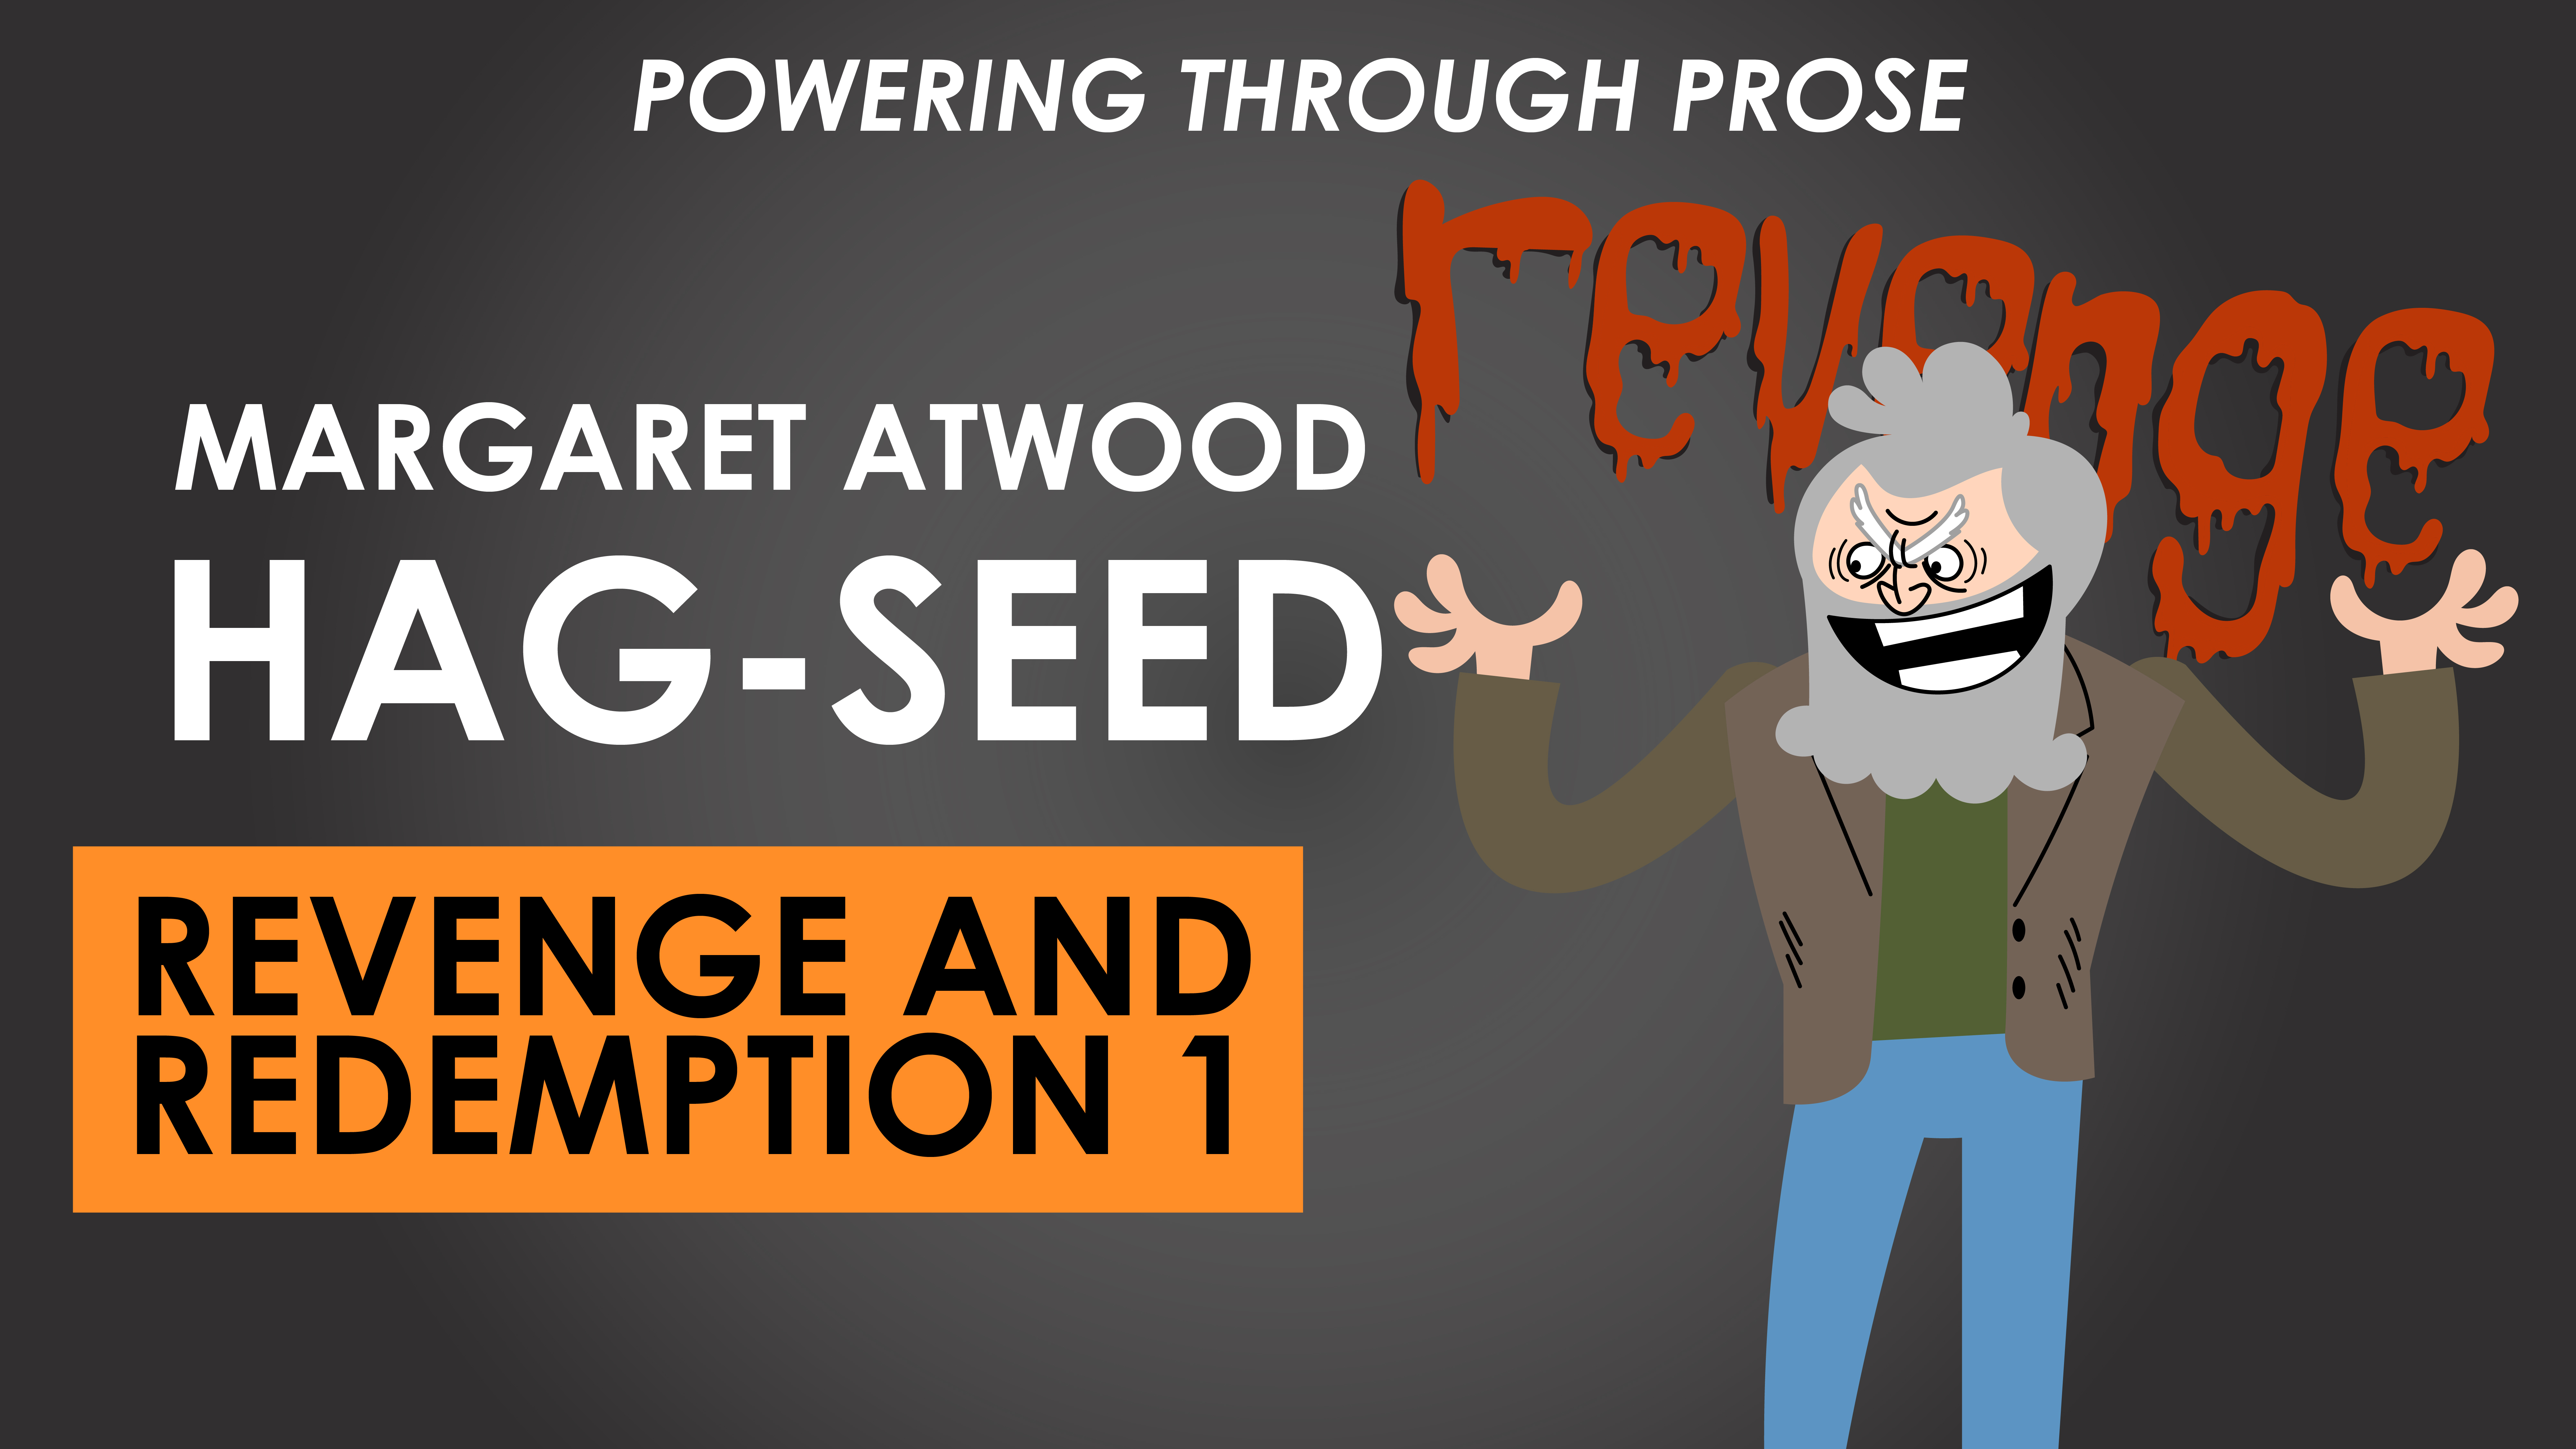 Hag-Seed - Margaret Atwood - Revenge and Redemption 1 - Powering through Prose Series